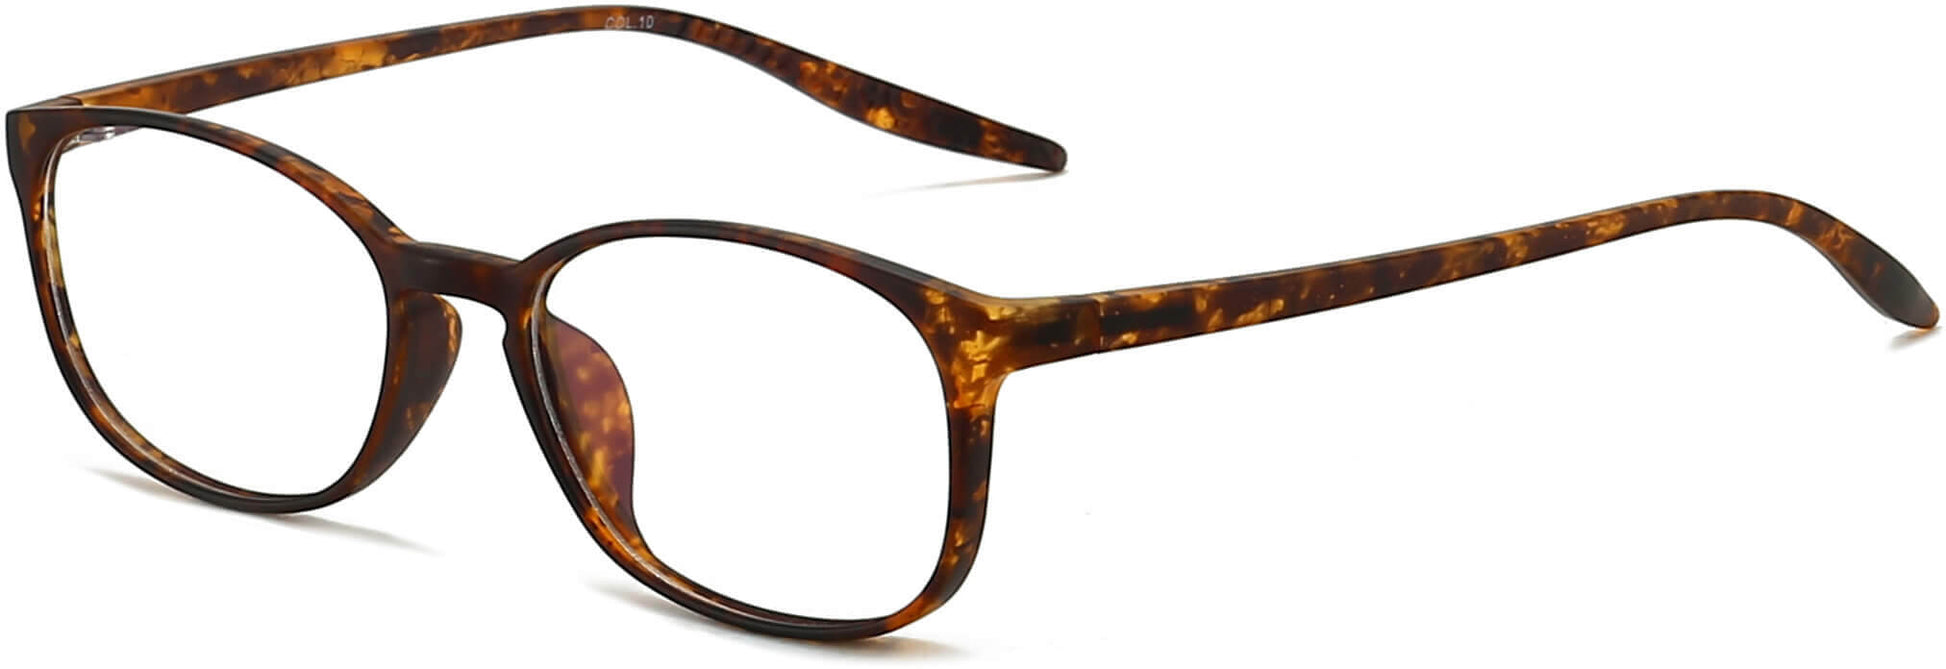 perrin-round-tortoise Eyeglasses from ANRRI, angle view